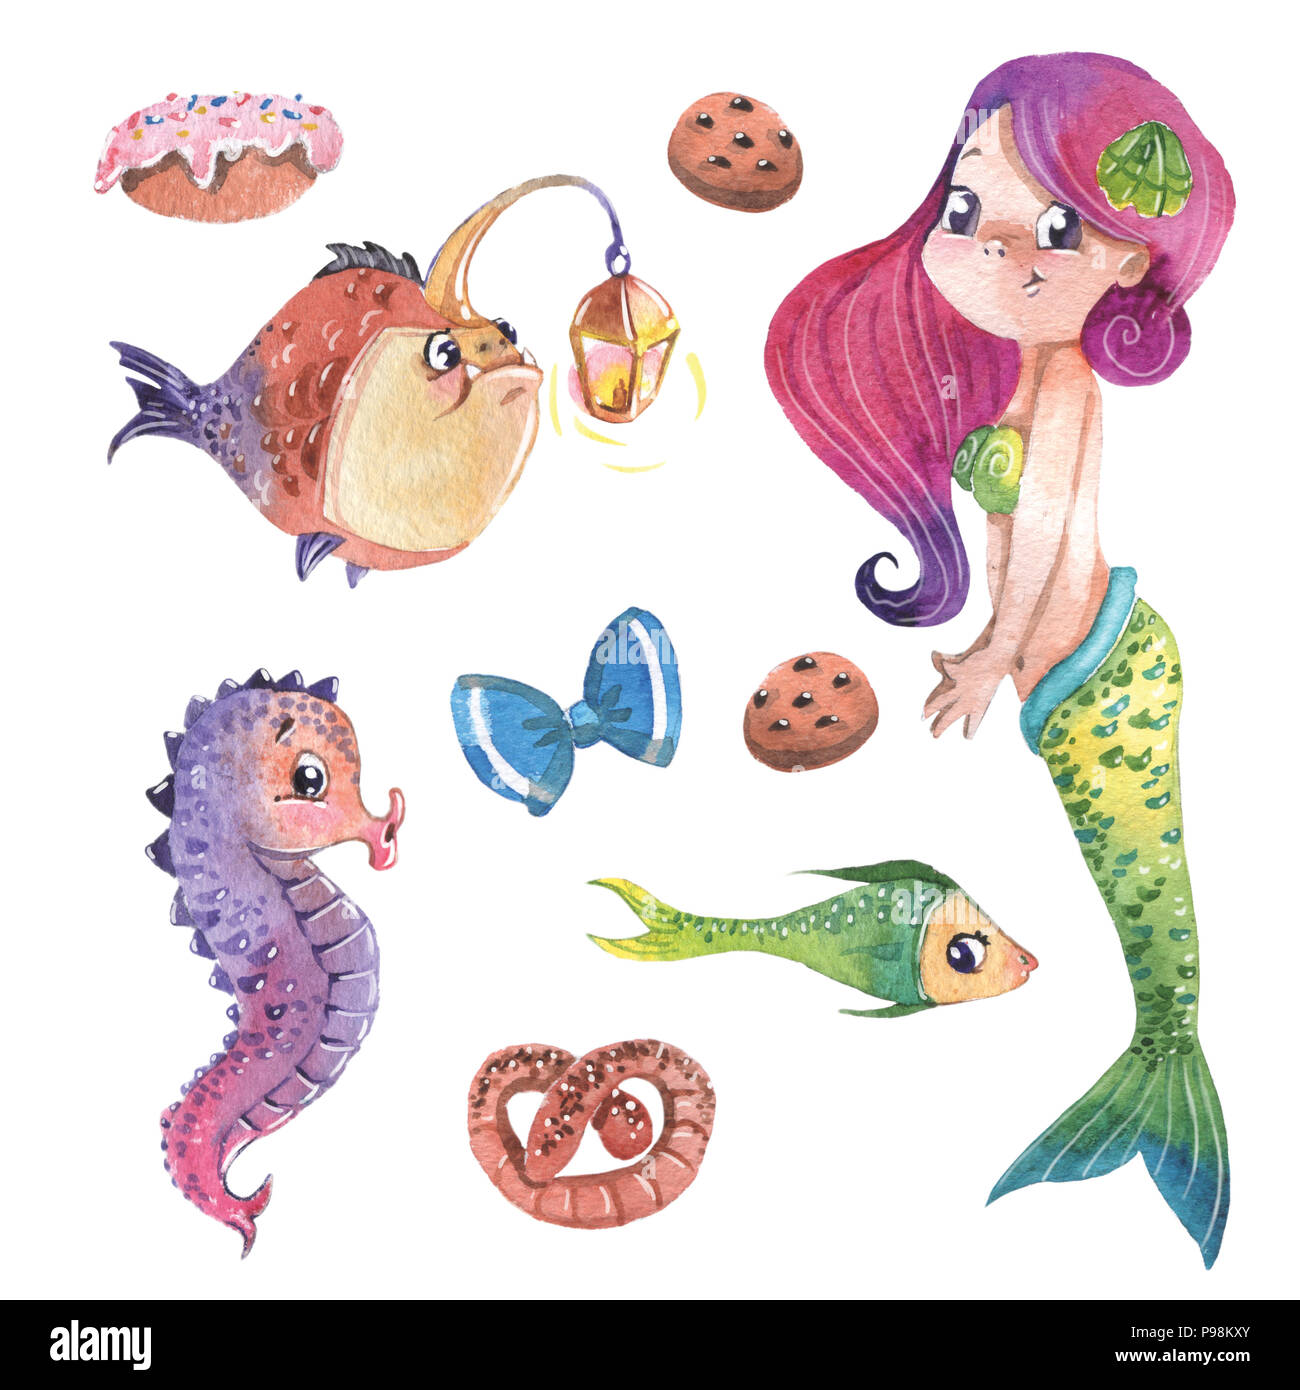 Hand painted cute little mermaid with fishes and sweets, watercolor illustration clipart set. Stock Photo